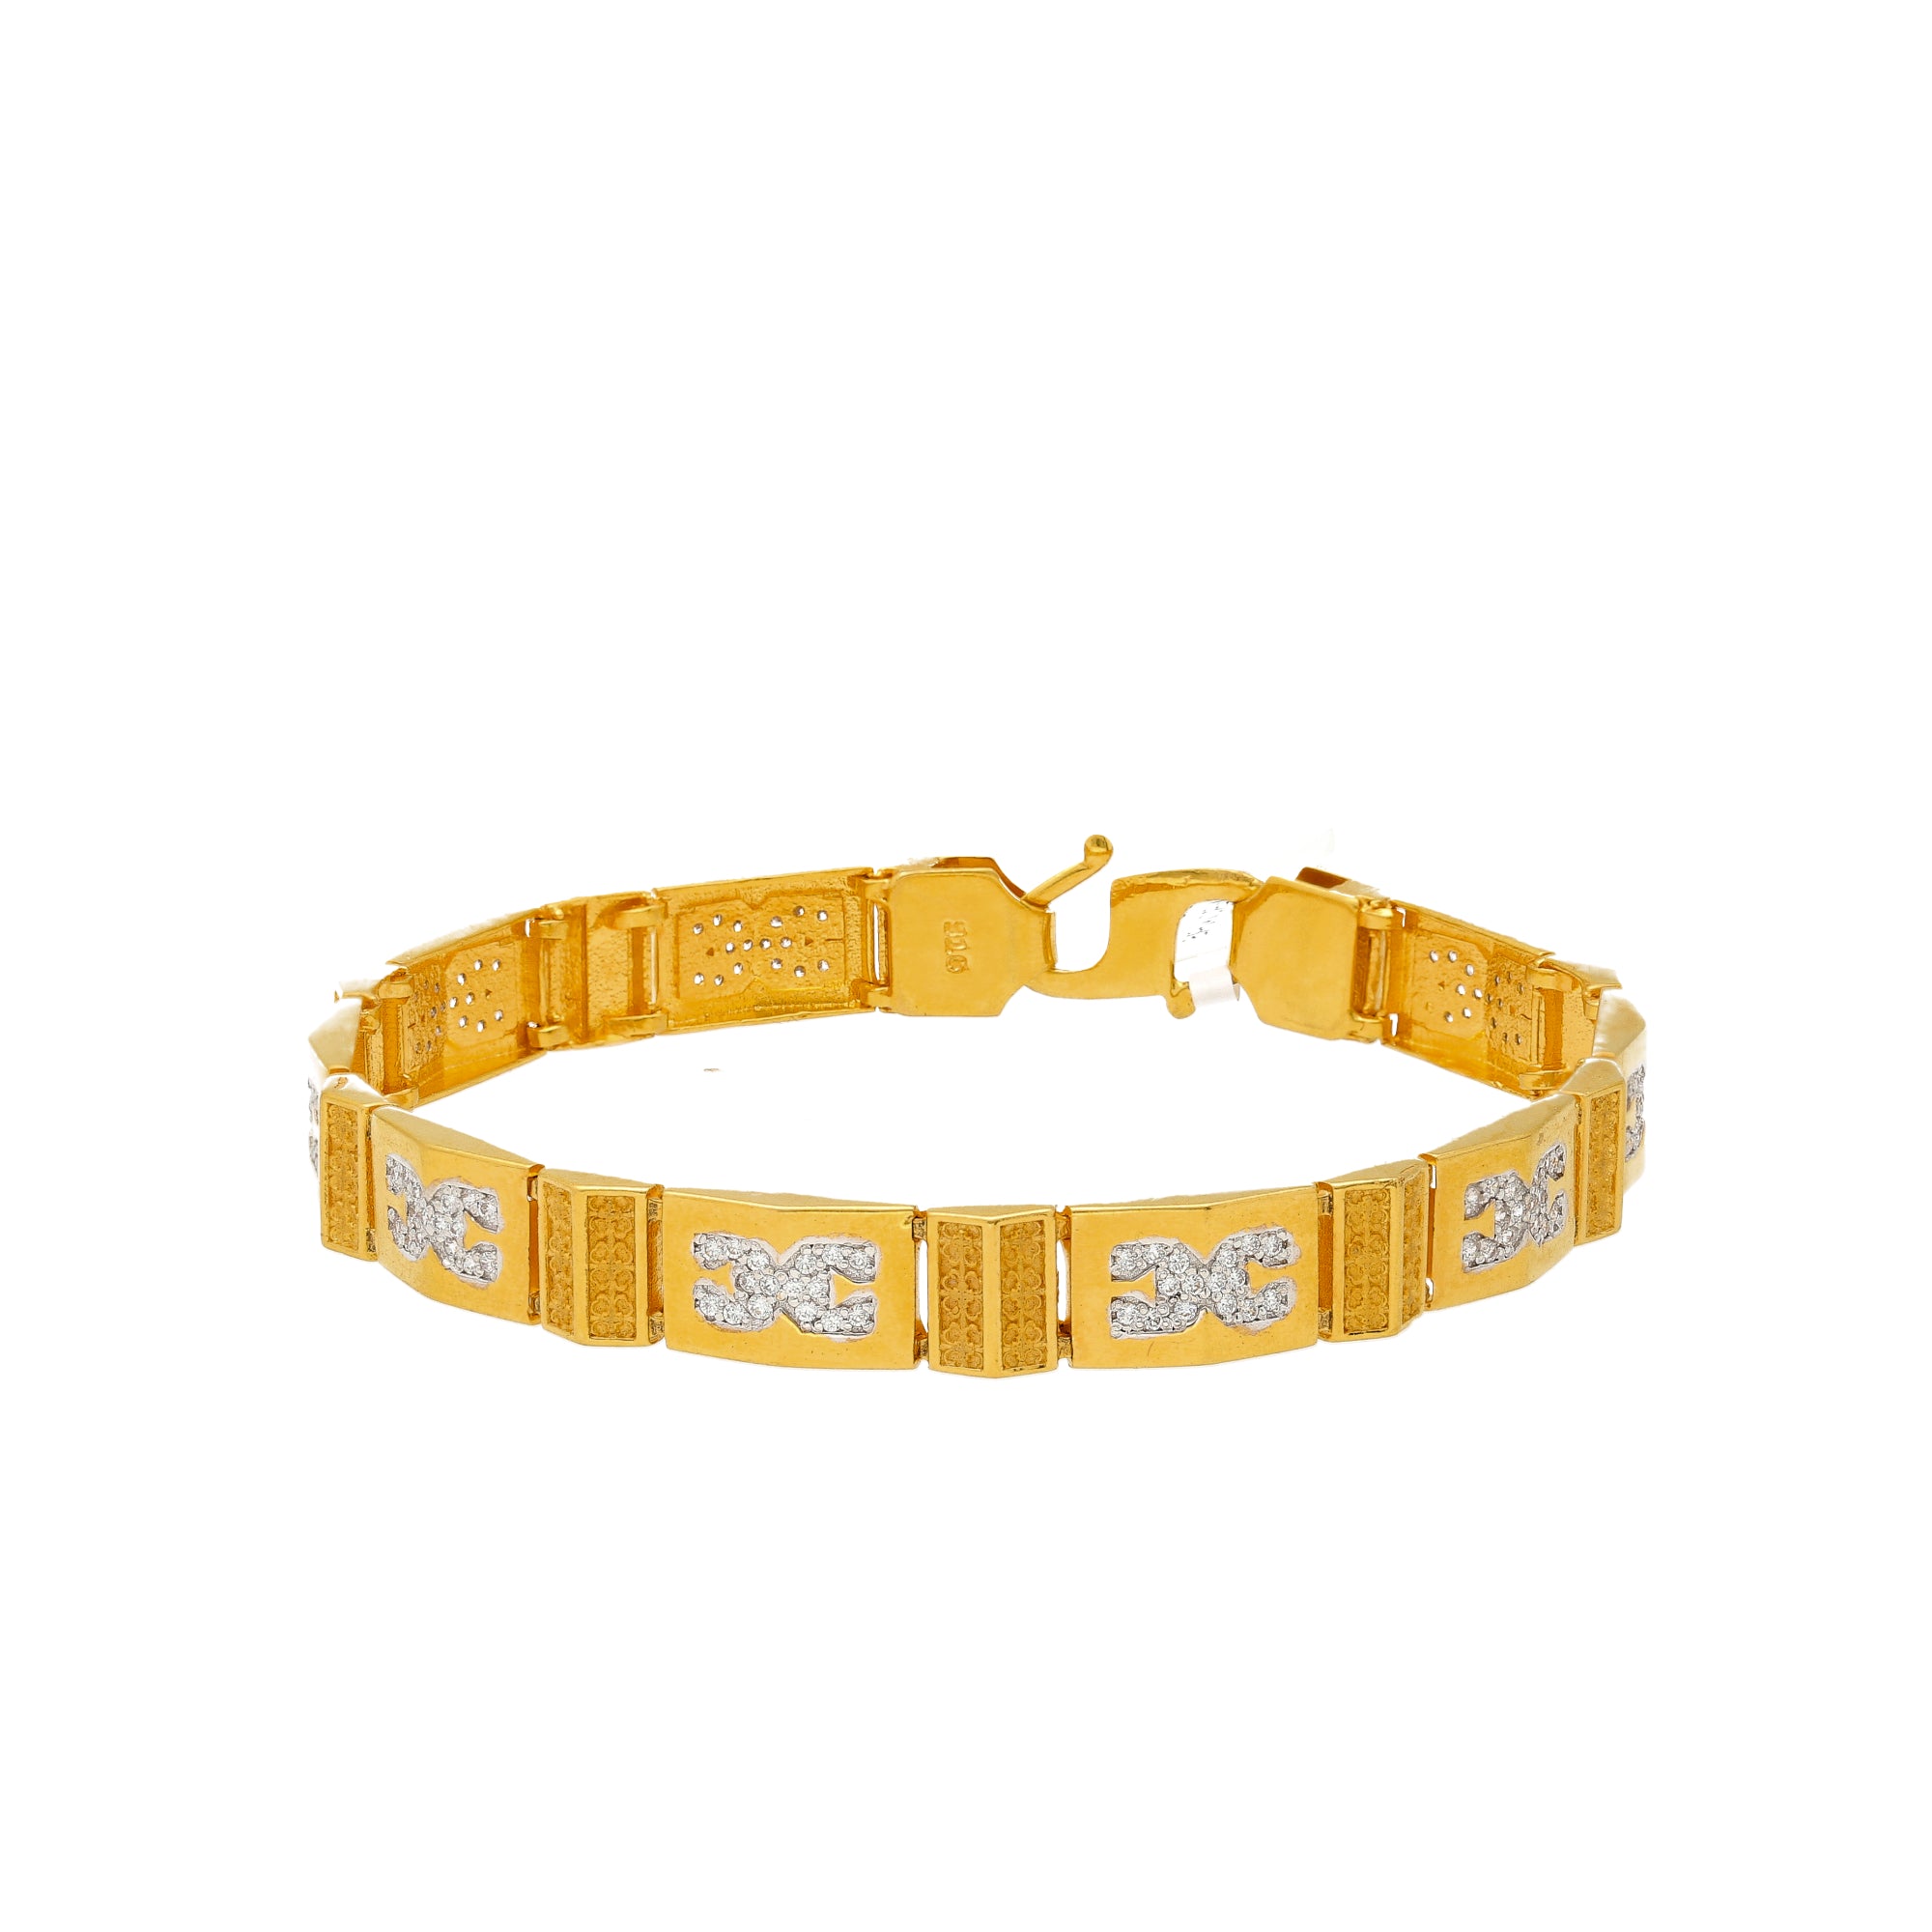 Latest men's gold bracelets designs with price - YouTube